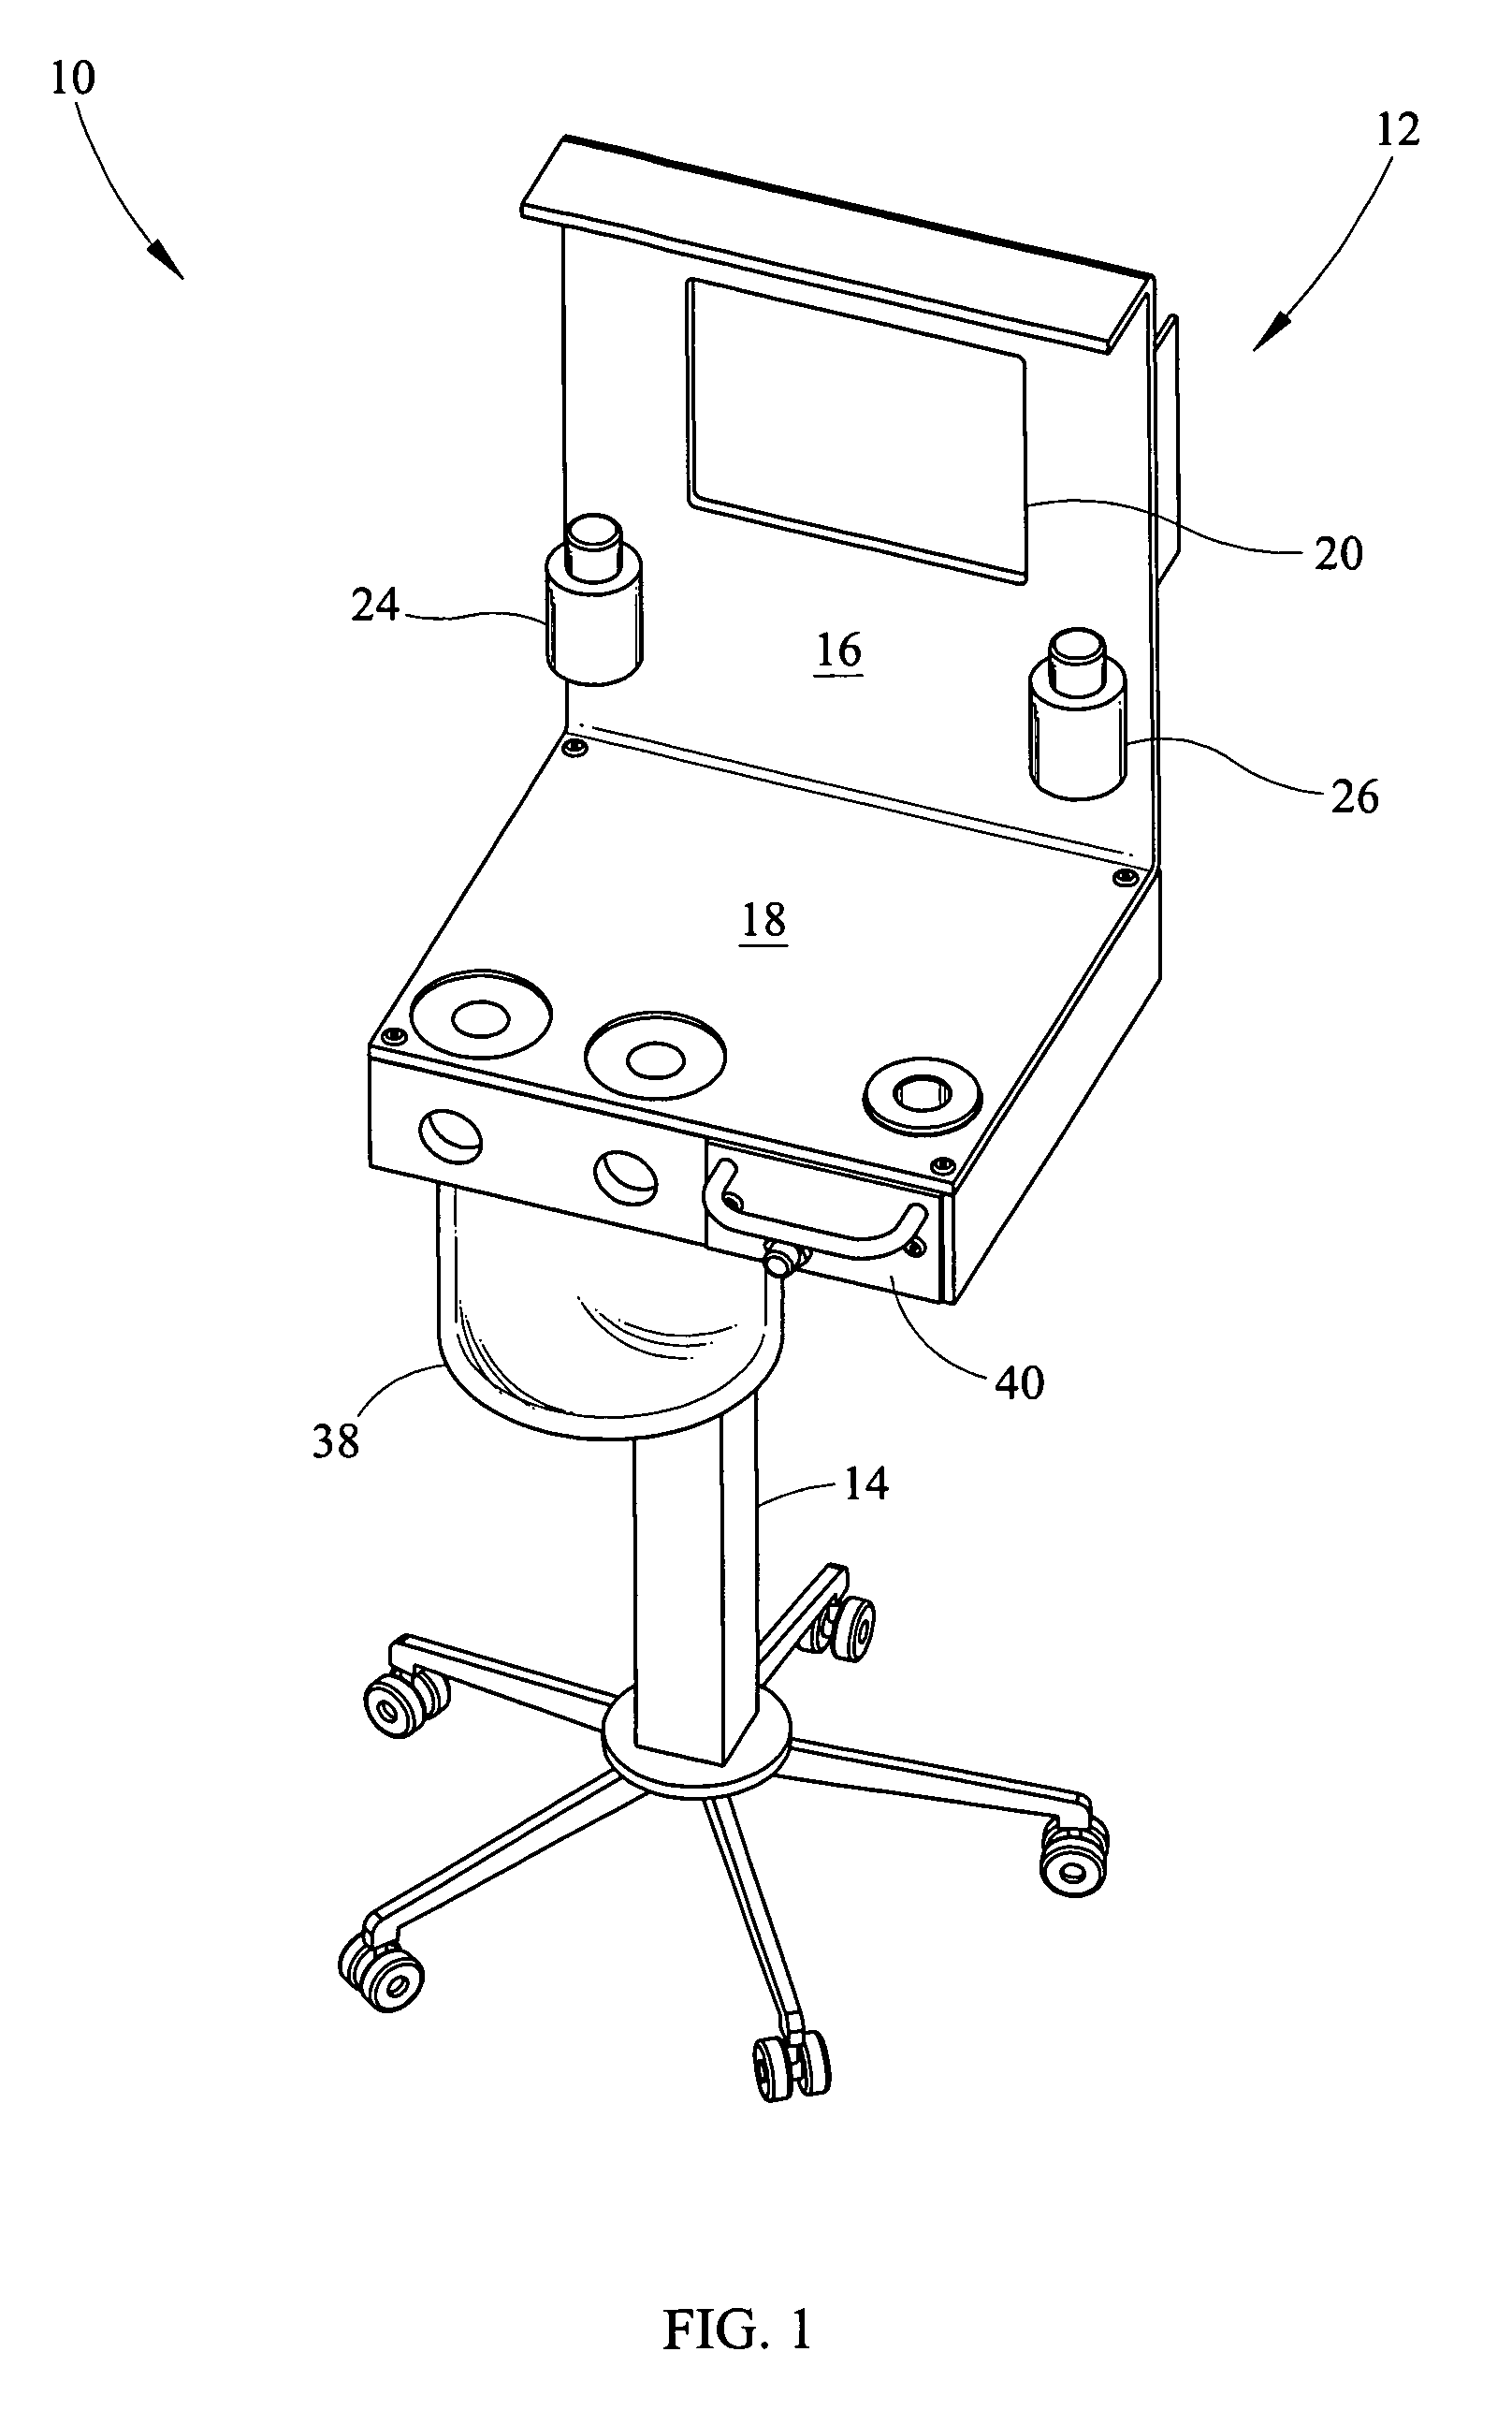 Electronic anesthesia delivery apparatus